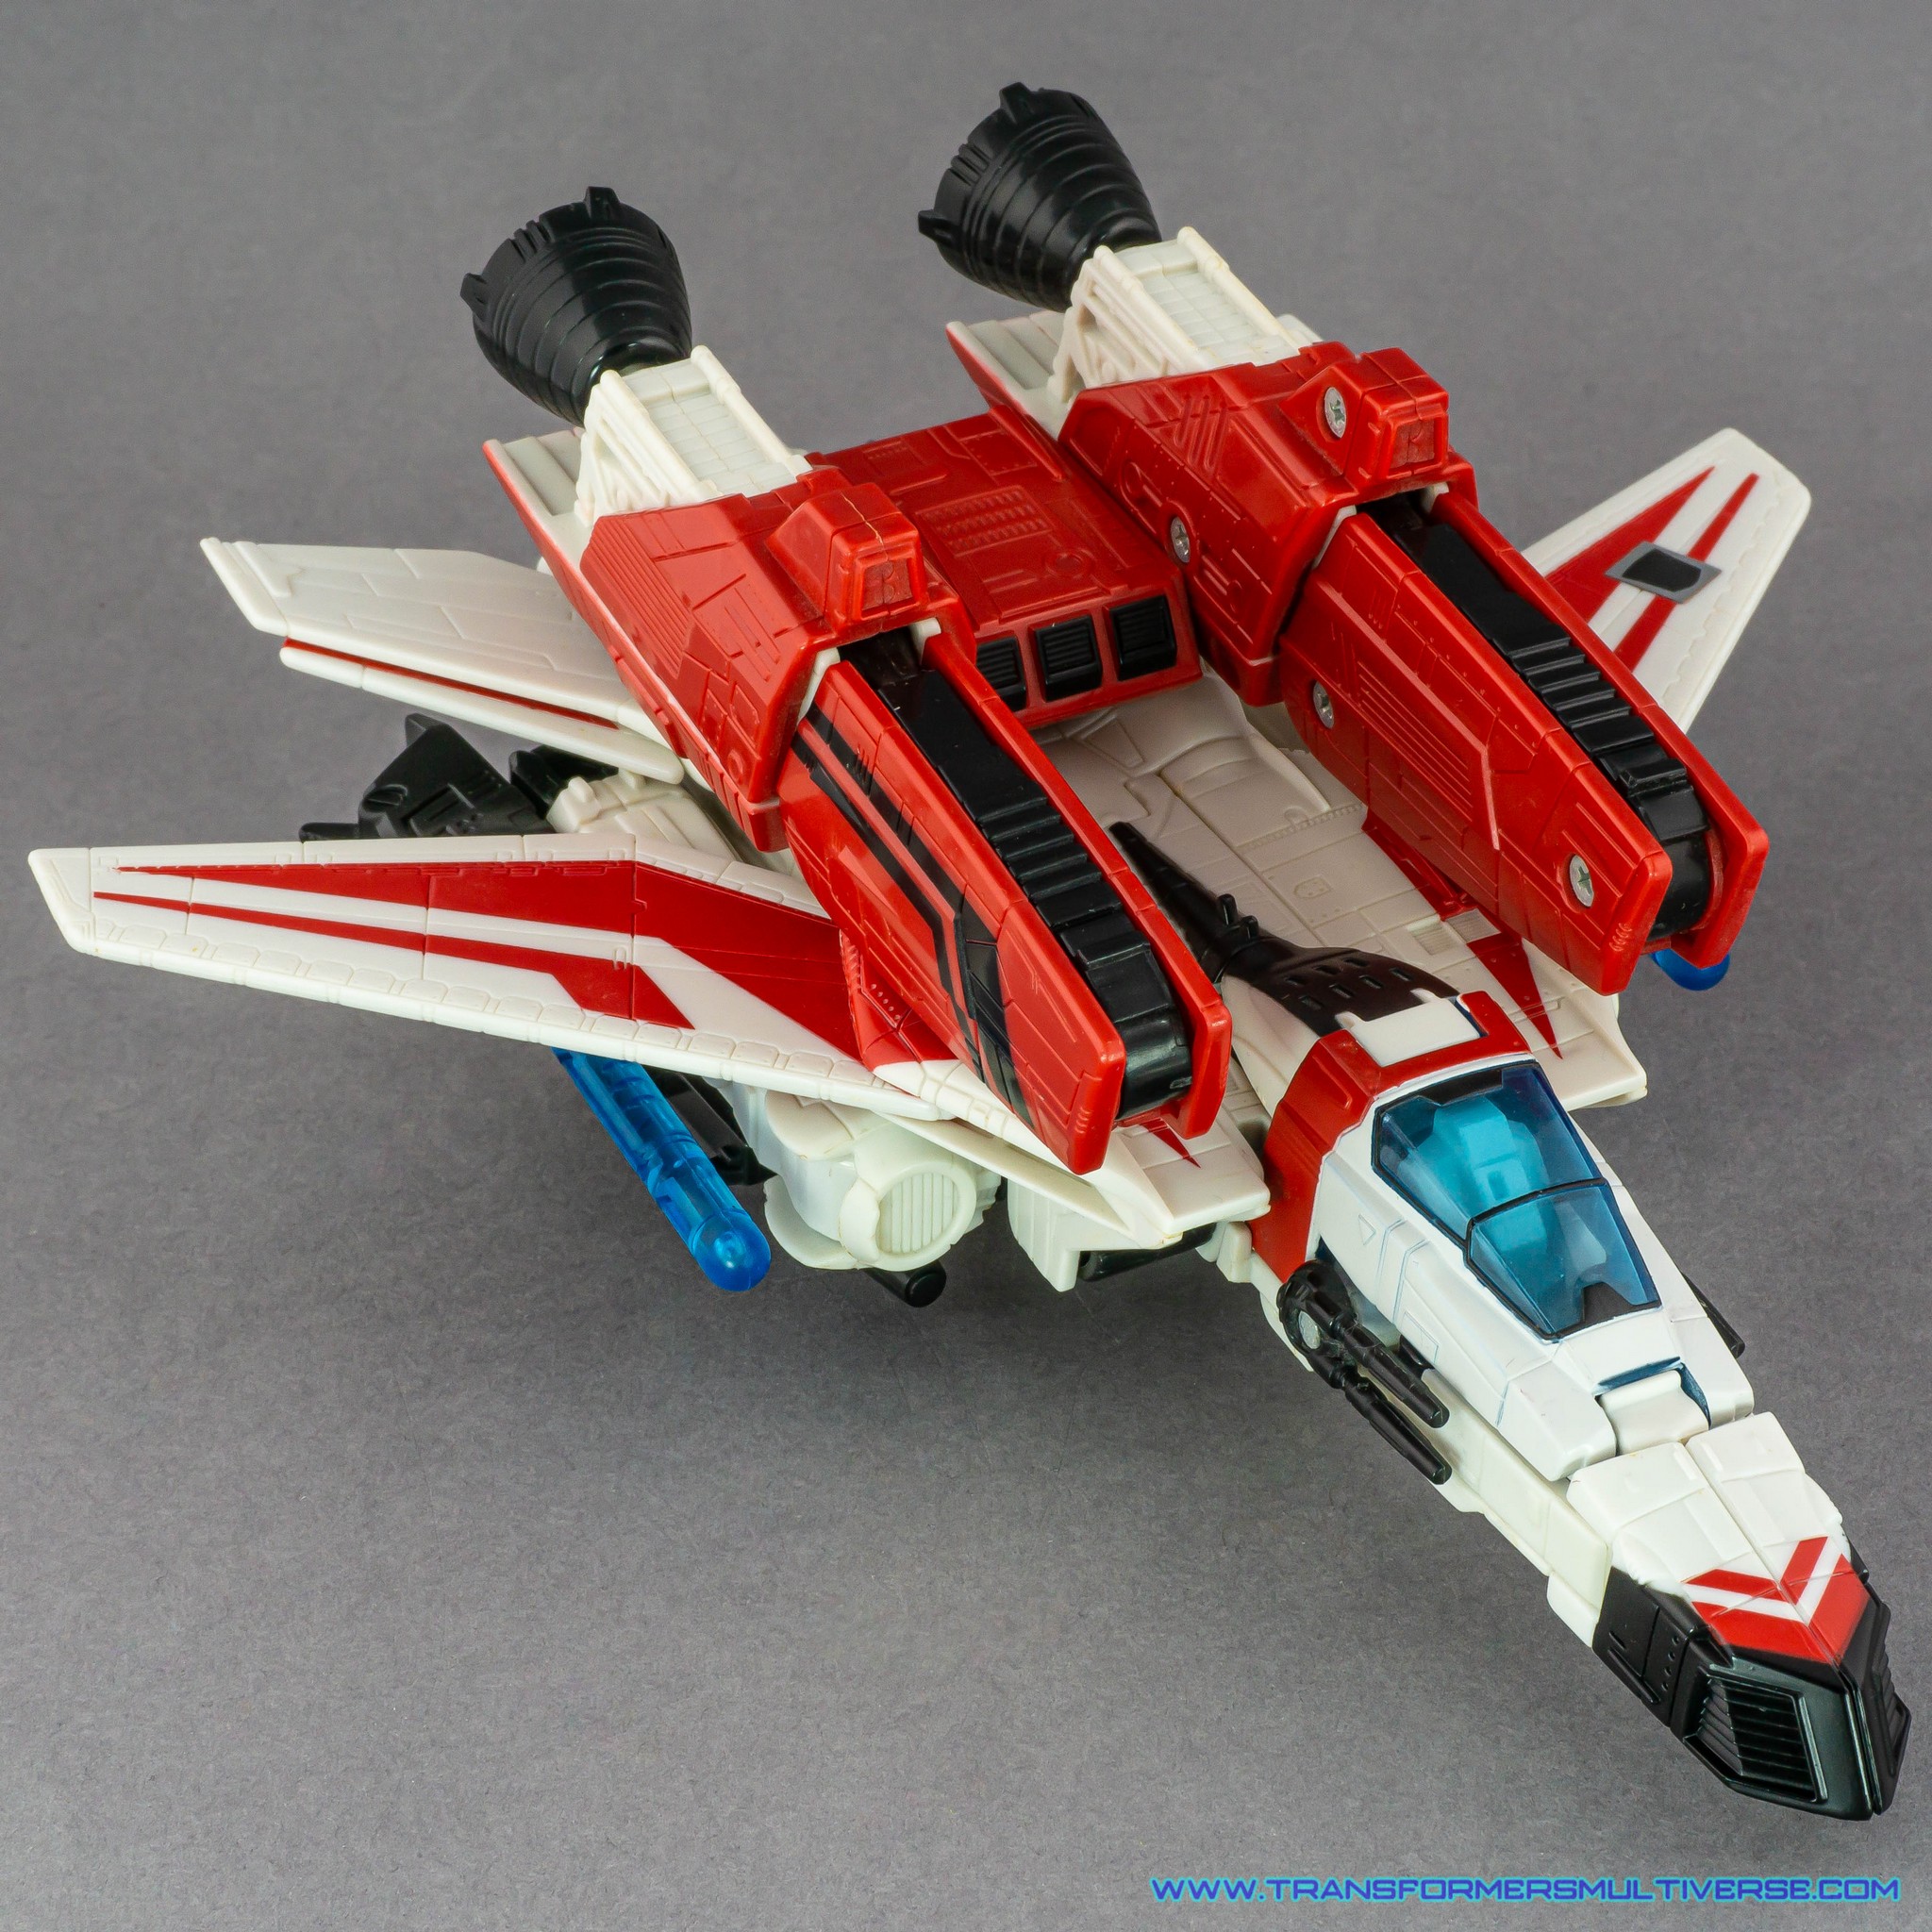 Transformers Classics Jetfire jet fighter mode with booster engines